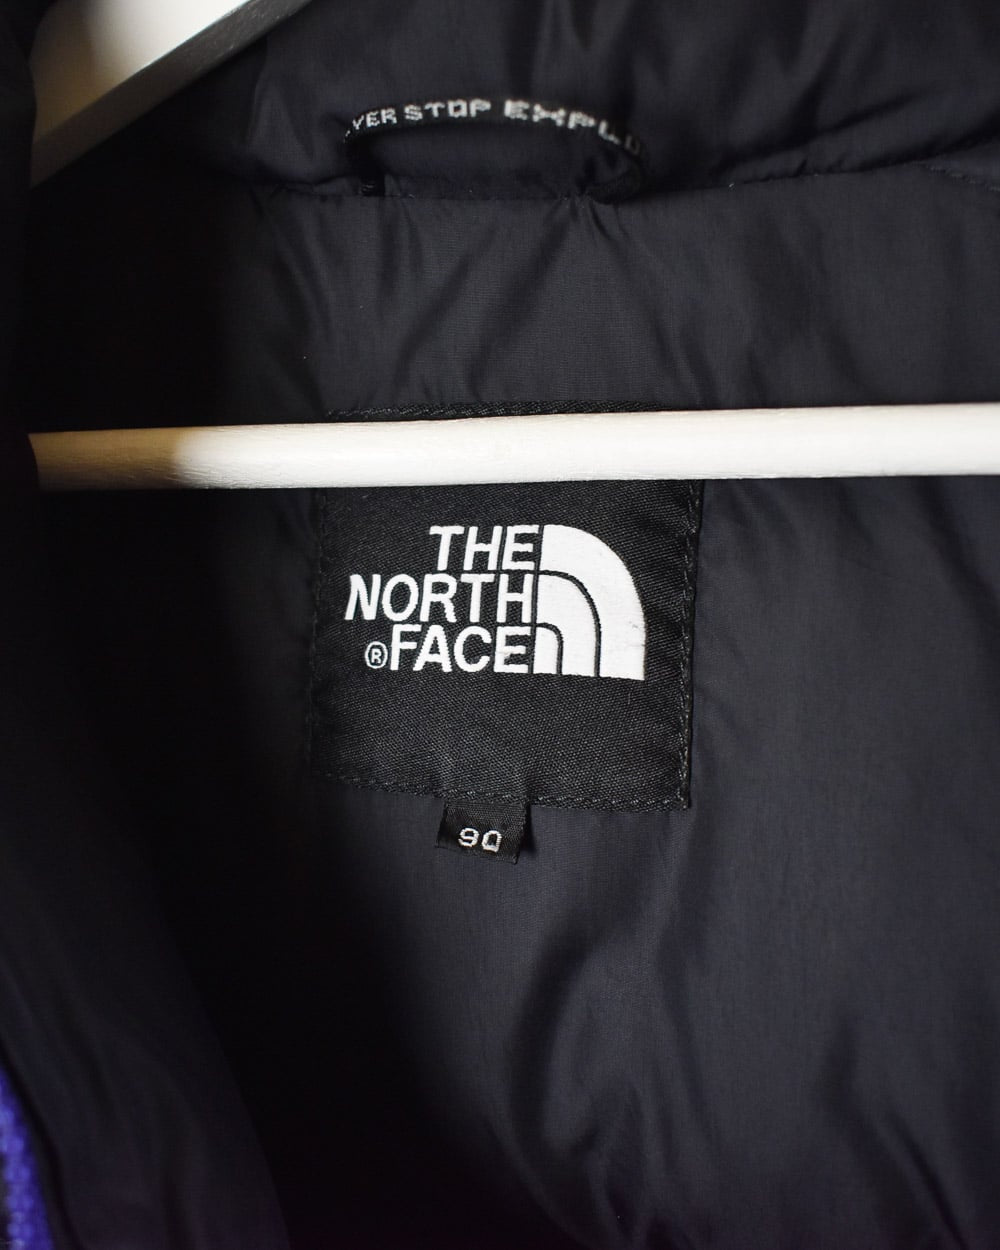 Purple The North Face Nuptse 700 Down Puffer Jacket - Small